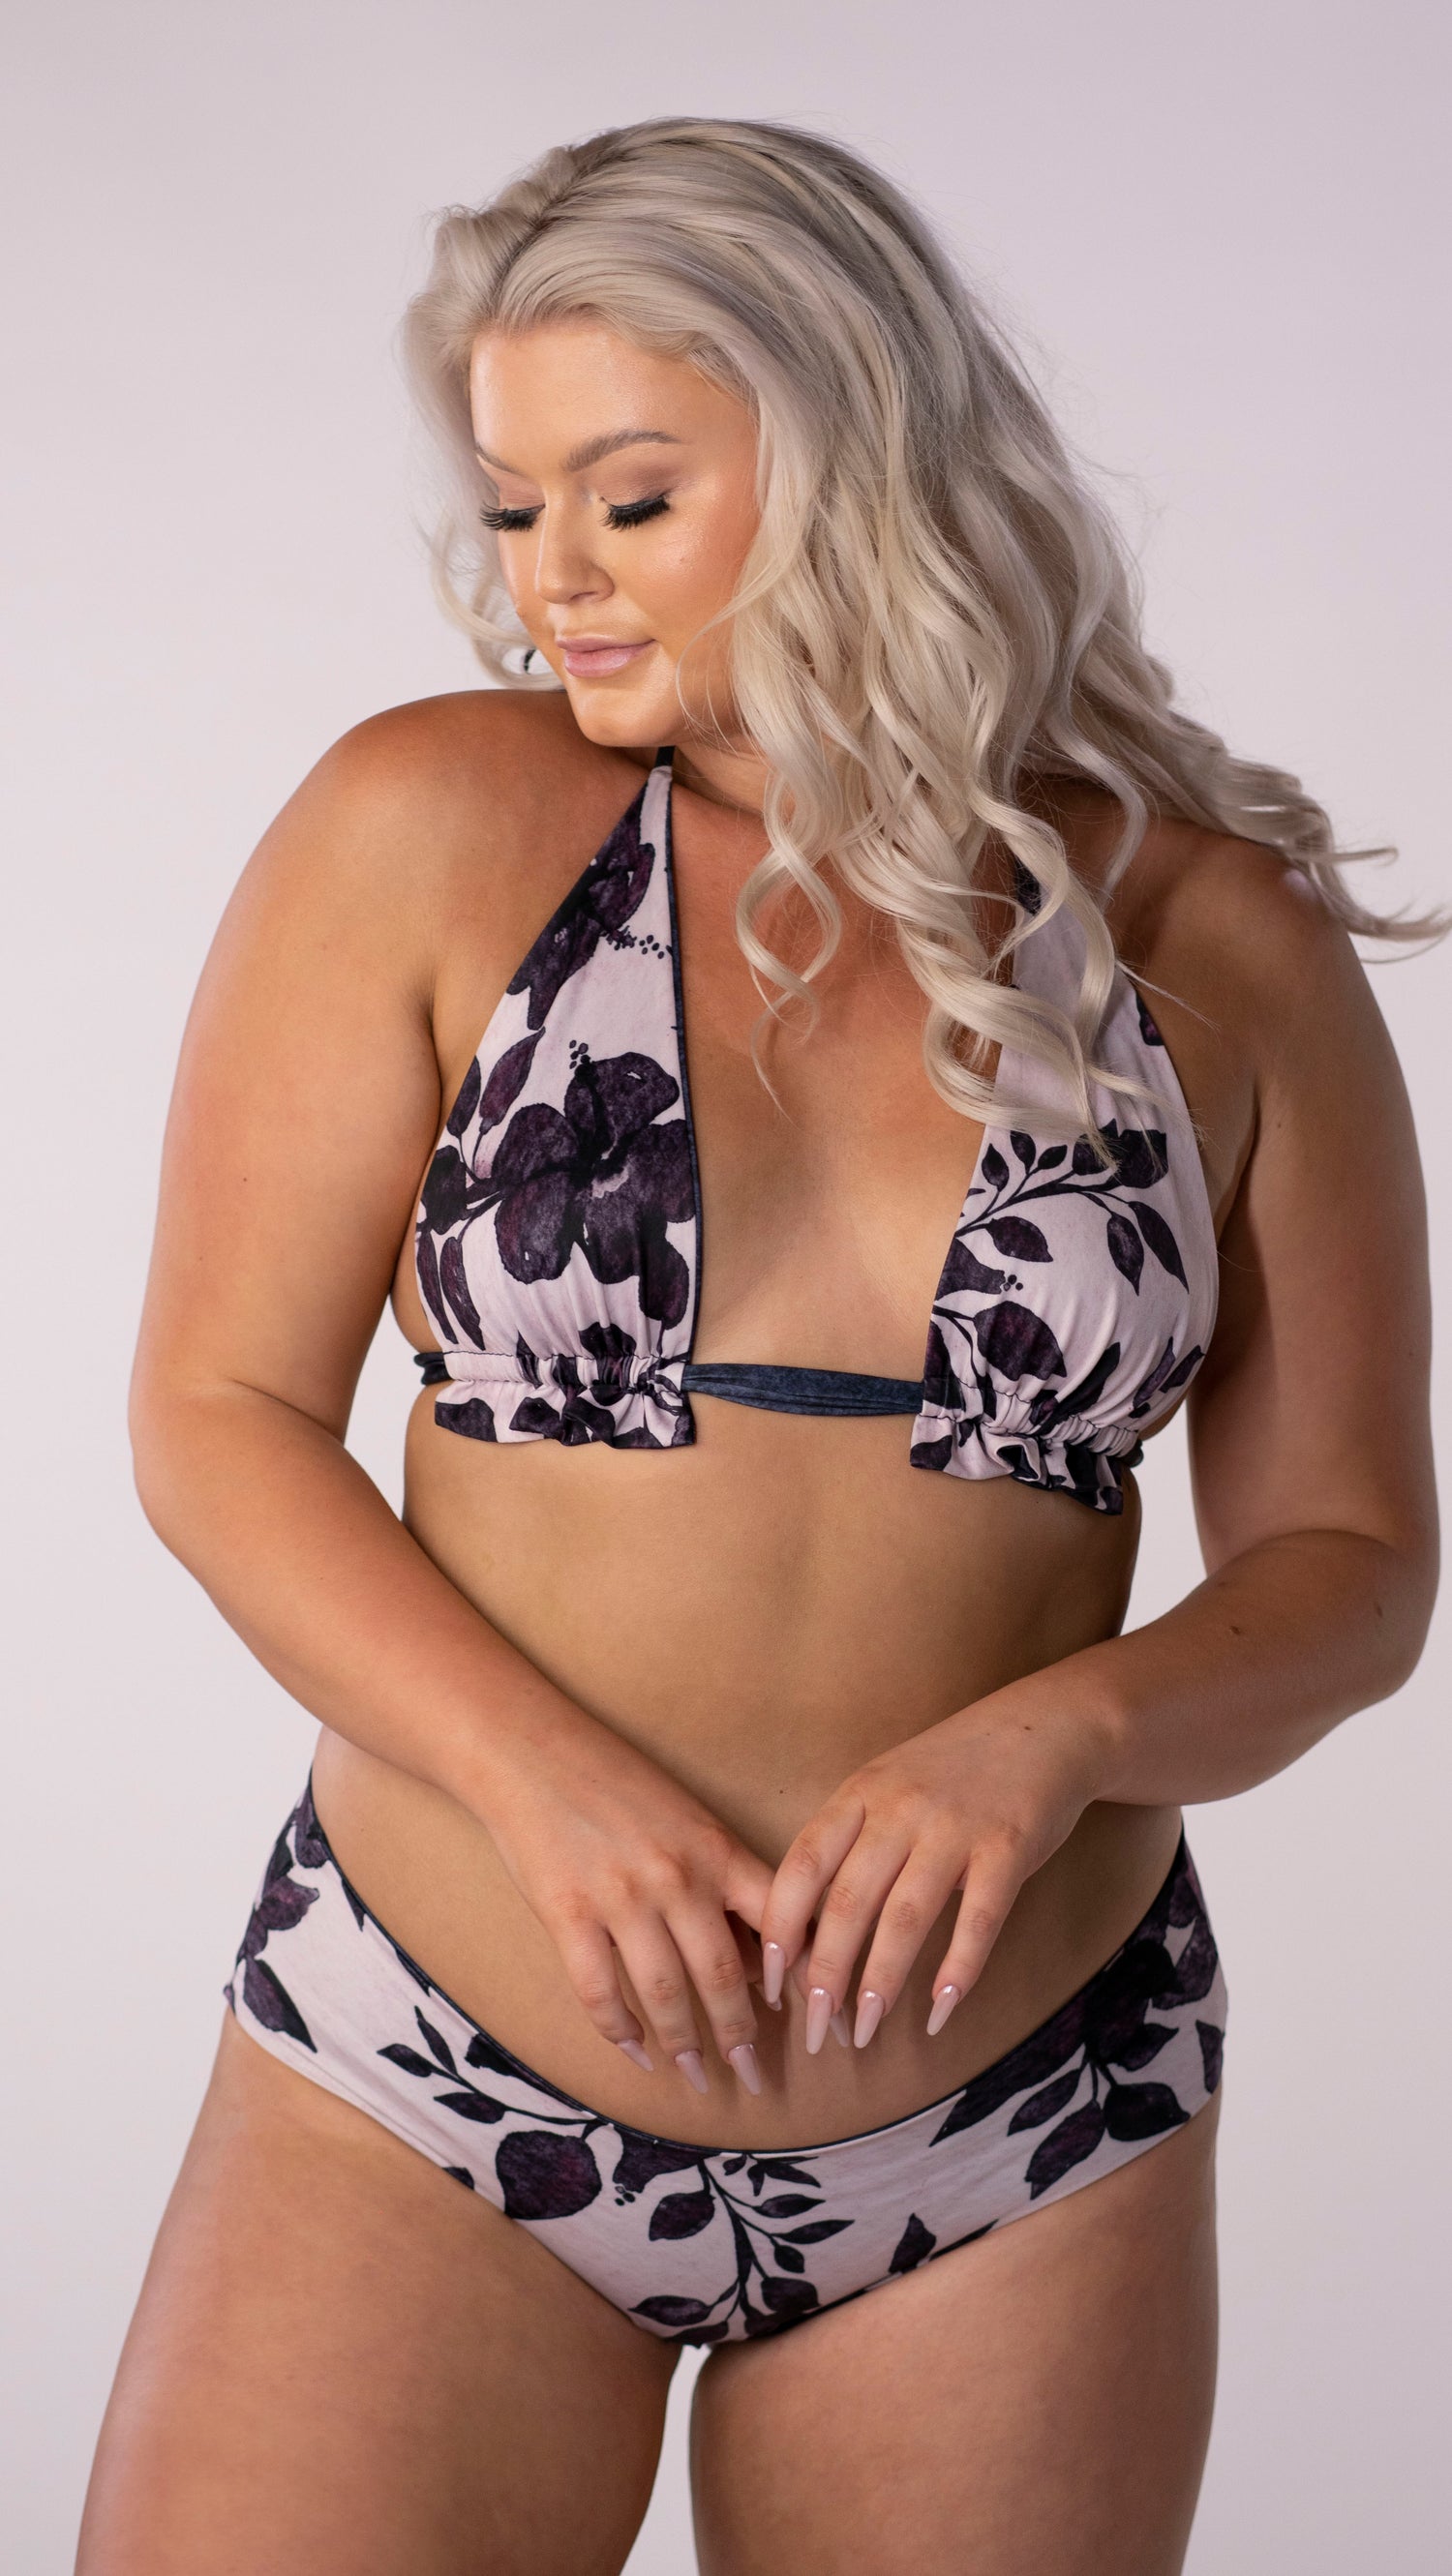 A staple bikini top, the classic triangle cut is always in fashion. This updated style features a ruffle detail under the bust where the tie gathers the fabric. This style features a wide cut under bust strap for additional comfort and support.